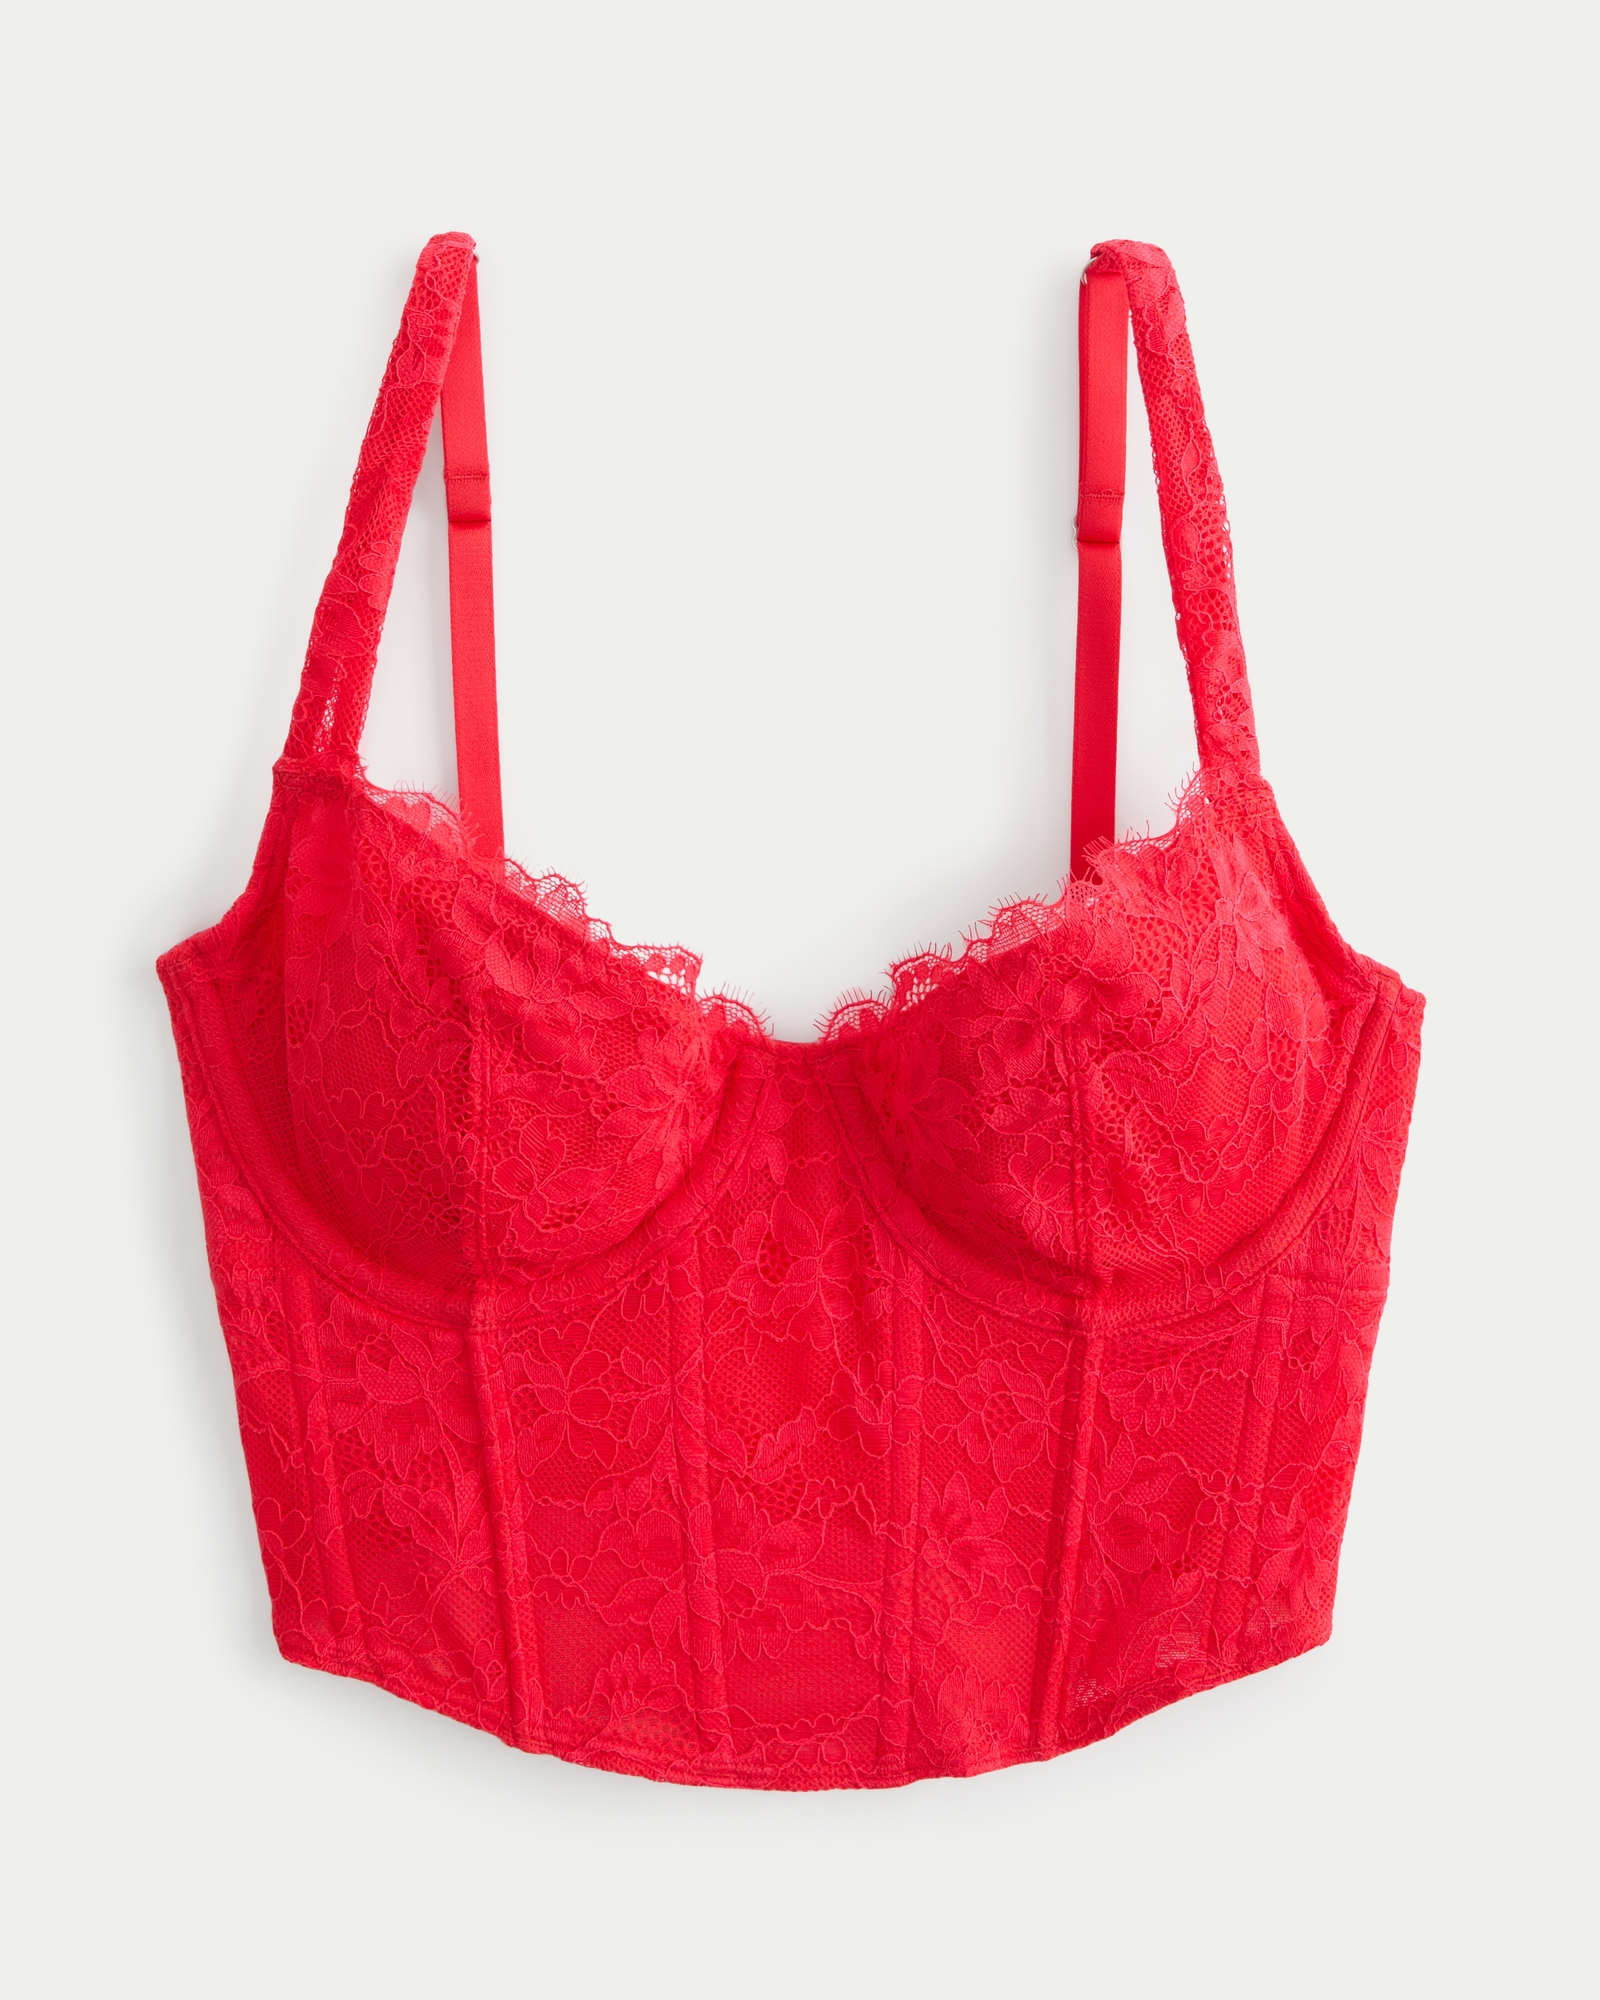 Gilly Hicks, Intimates & Sleepwear, Nwt Gilly Hicks Lace Bralette Crop  Top Size Xxs Burgundy Red Removable Cups